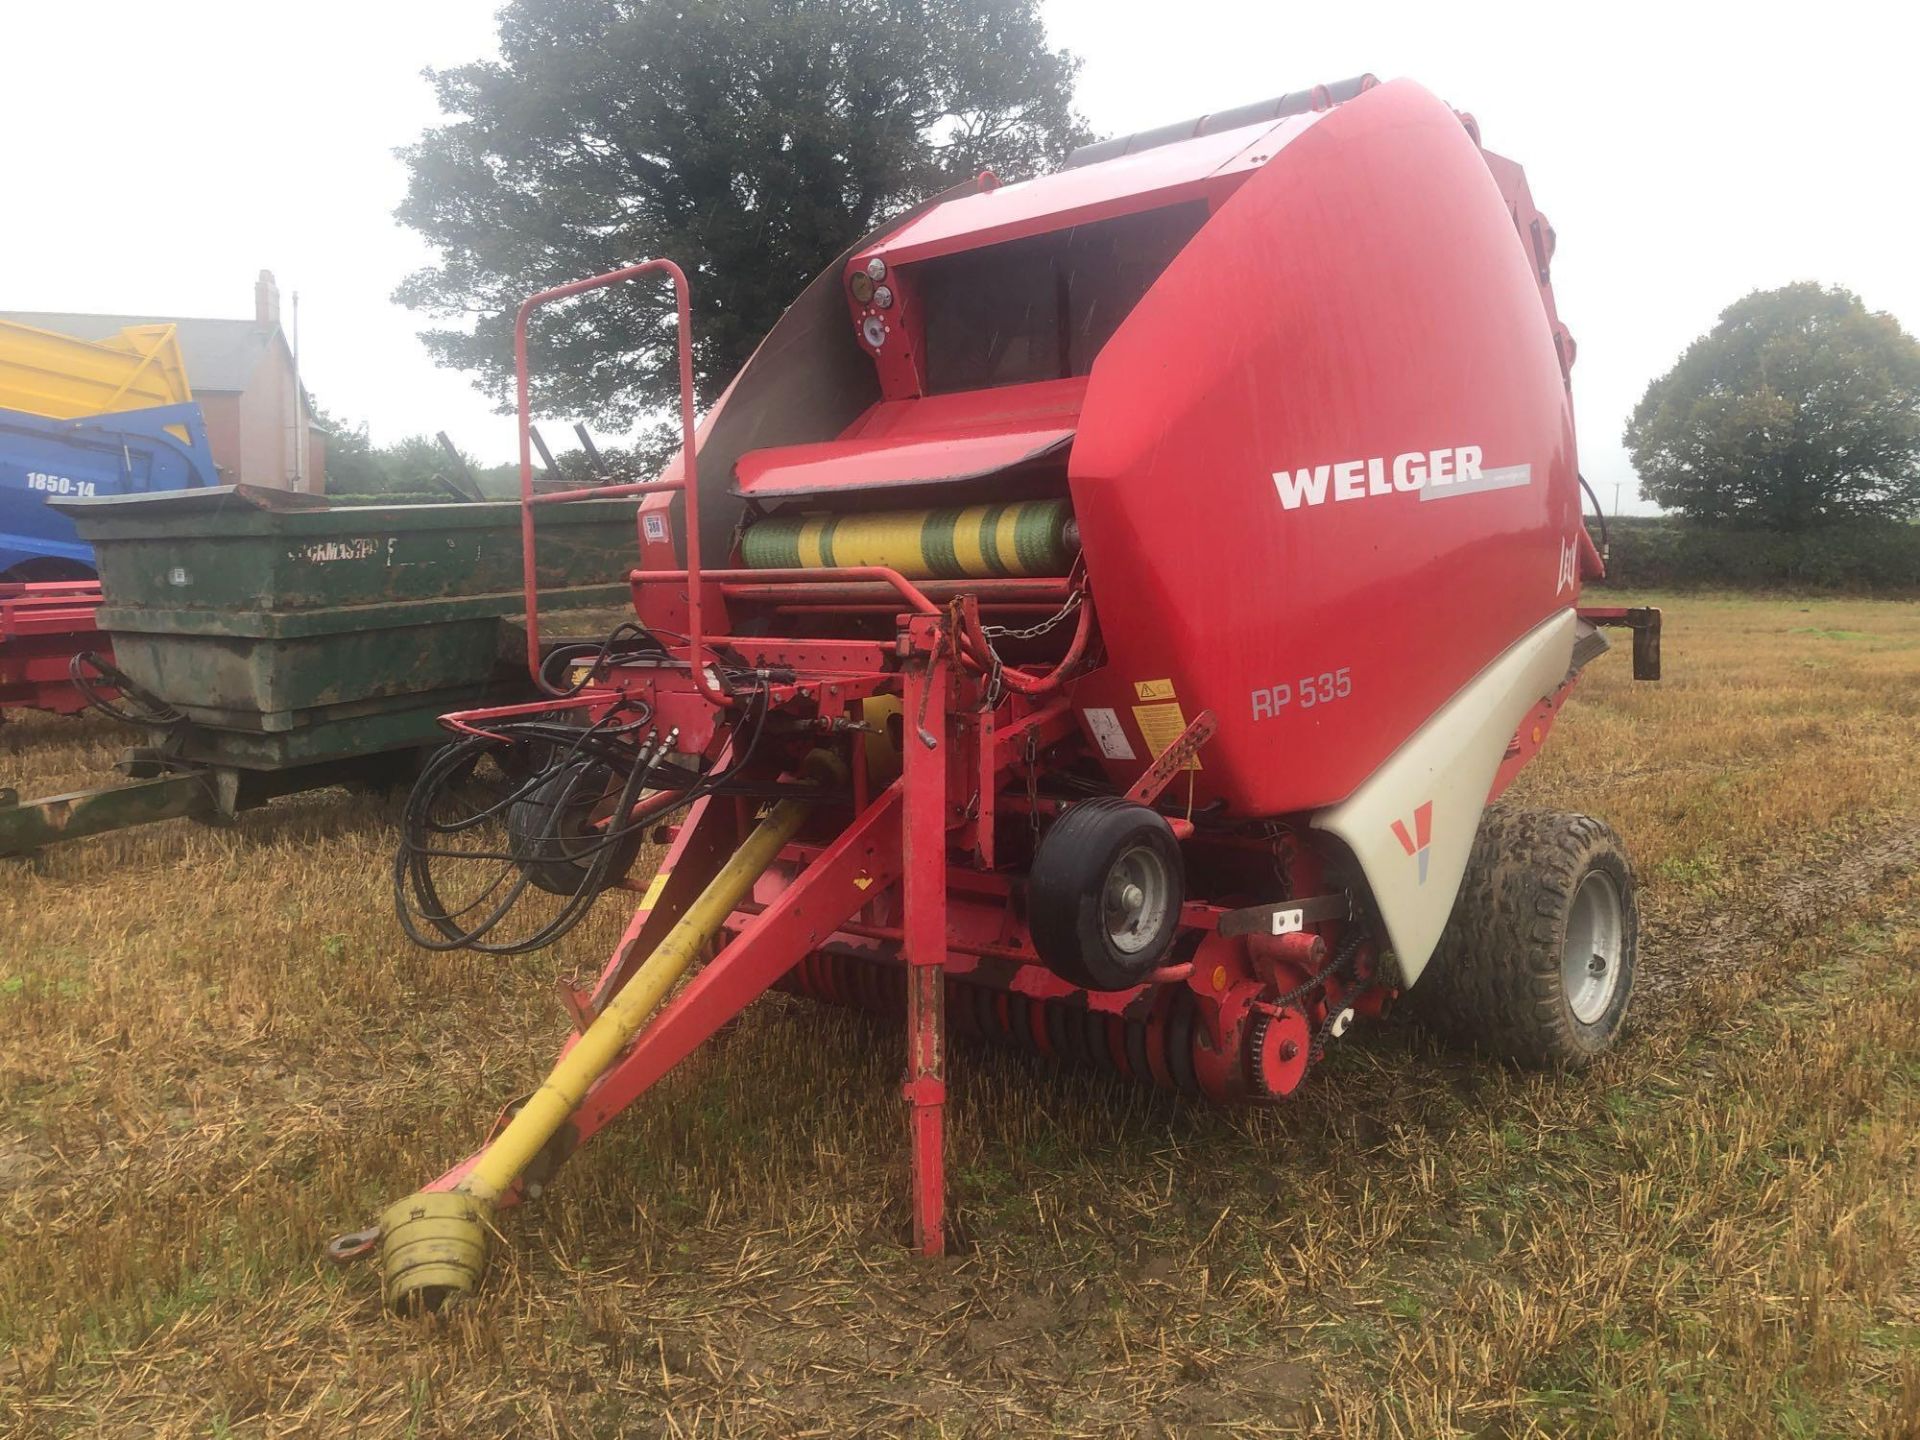 2007 Welger RP535 round baler. Variable chamber belt. Bale count showing: 77,771. Bale counter in of - Image 2 of 4